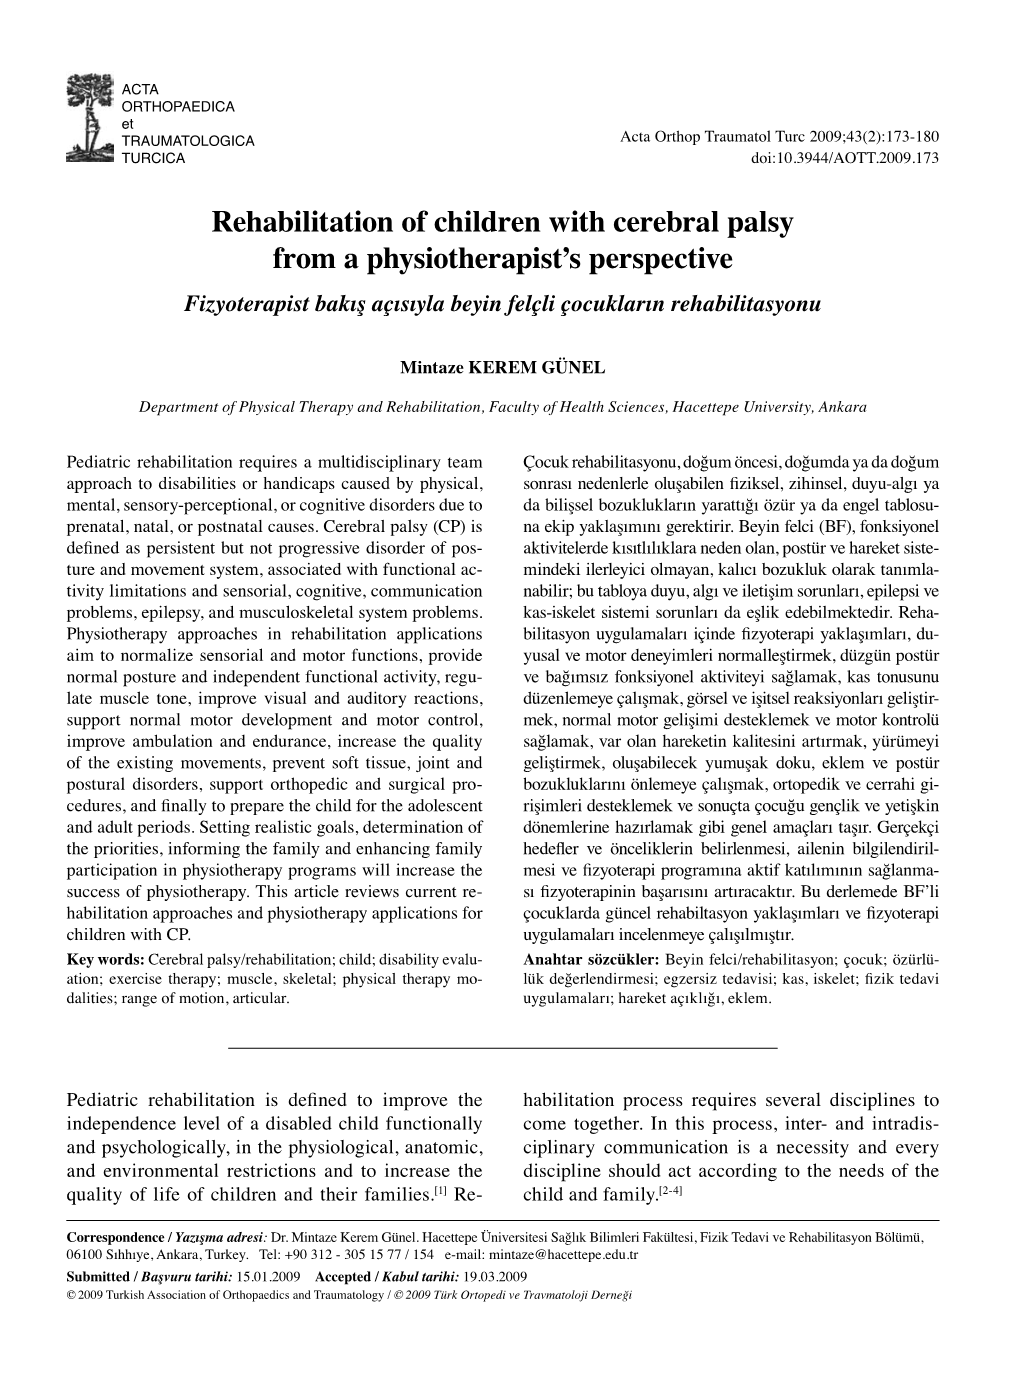 Rehabilitation of Children with Cerebral Palsy from a Physiotherapist's